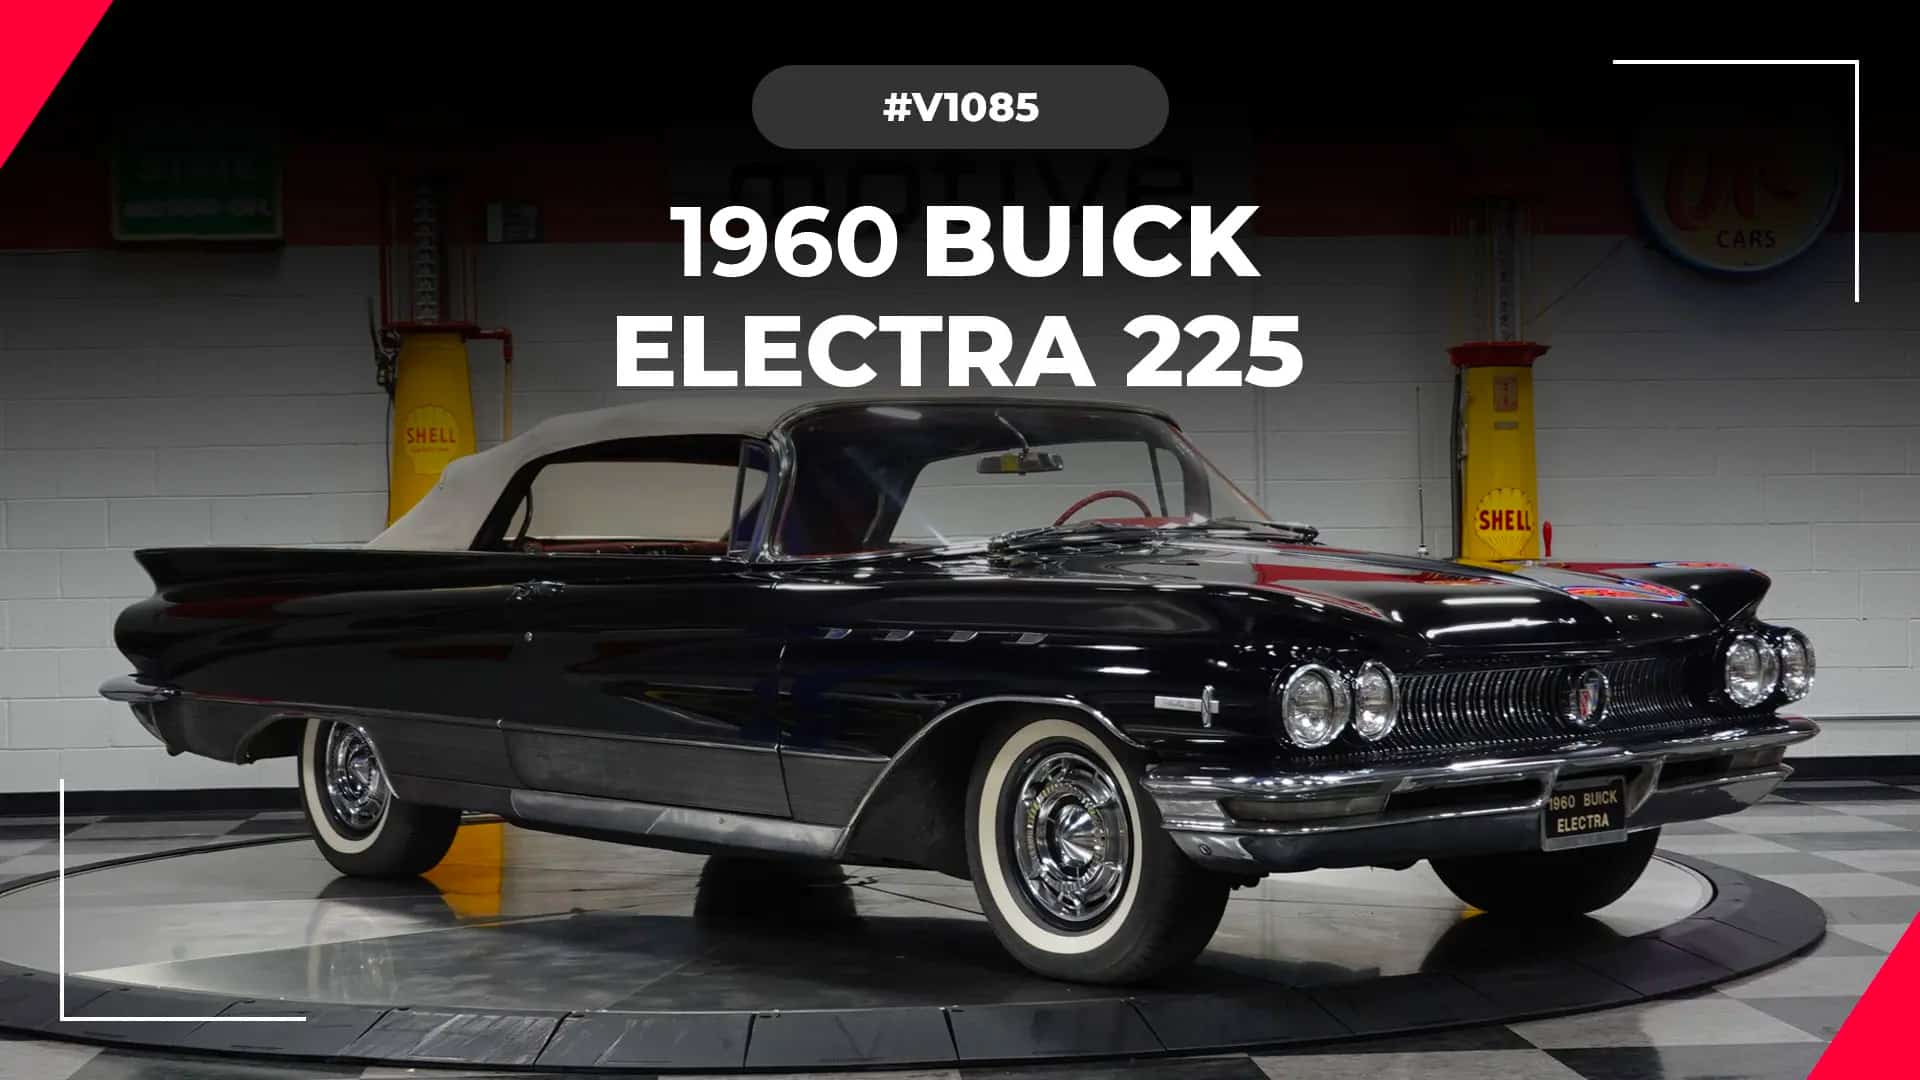 The Buick Electra